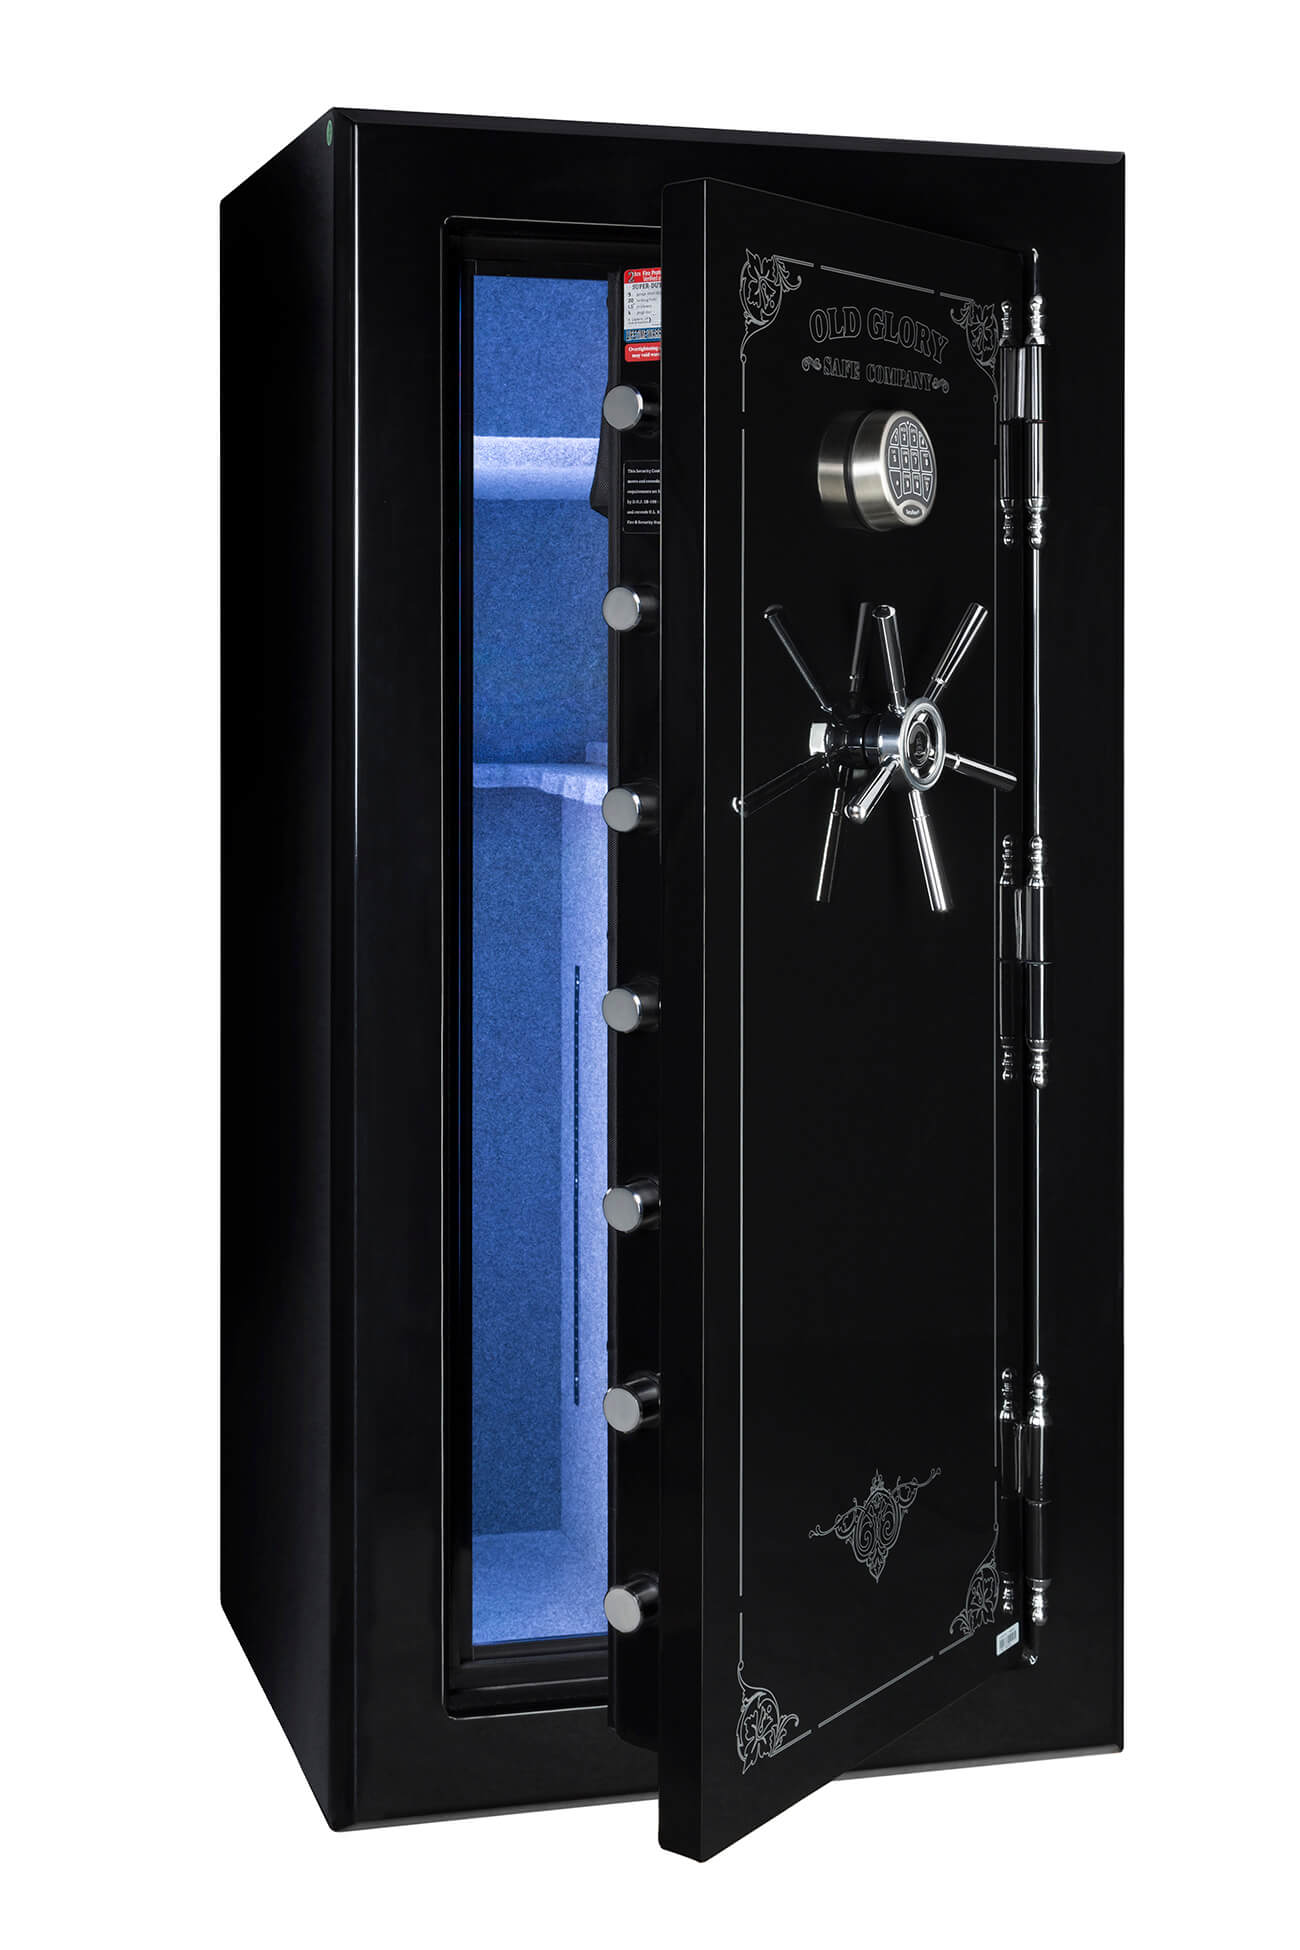 60 inch tall by 30 inch wide Old Glory gun safe unlocked in gloss black with white LED lighting